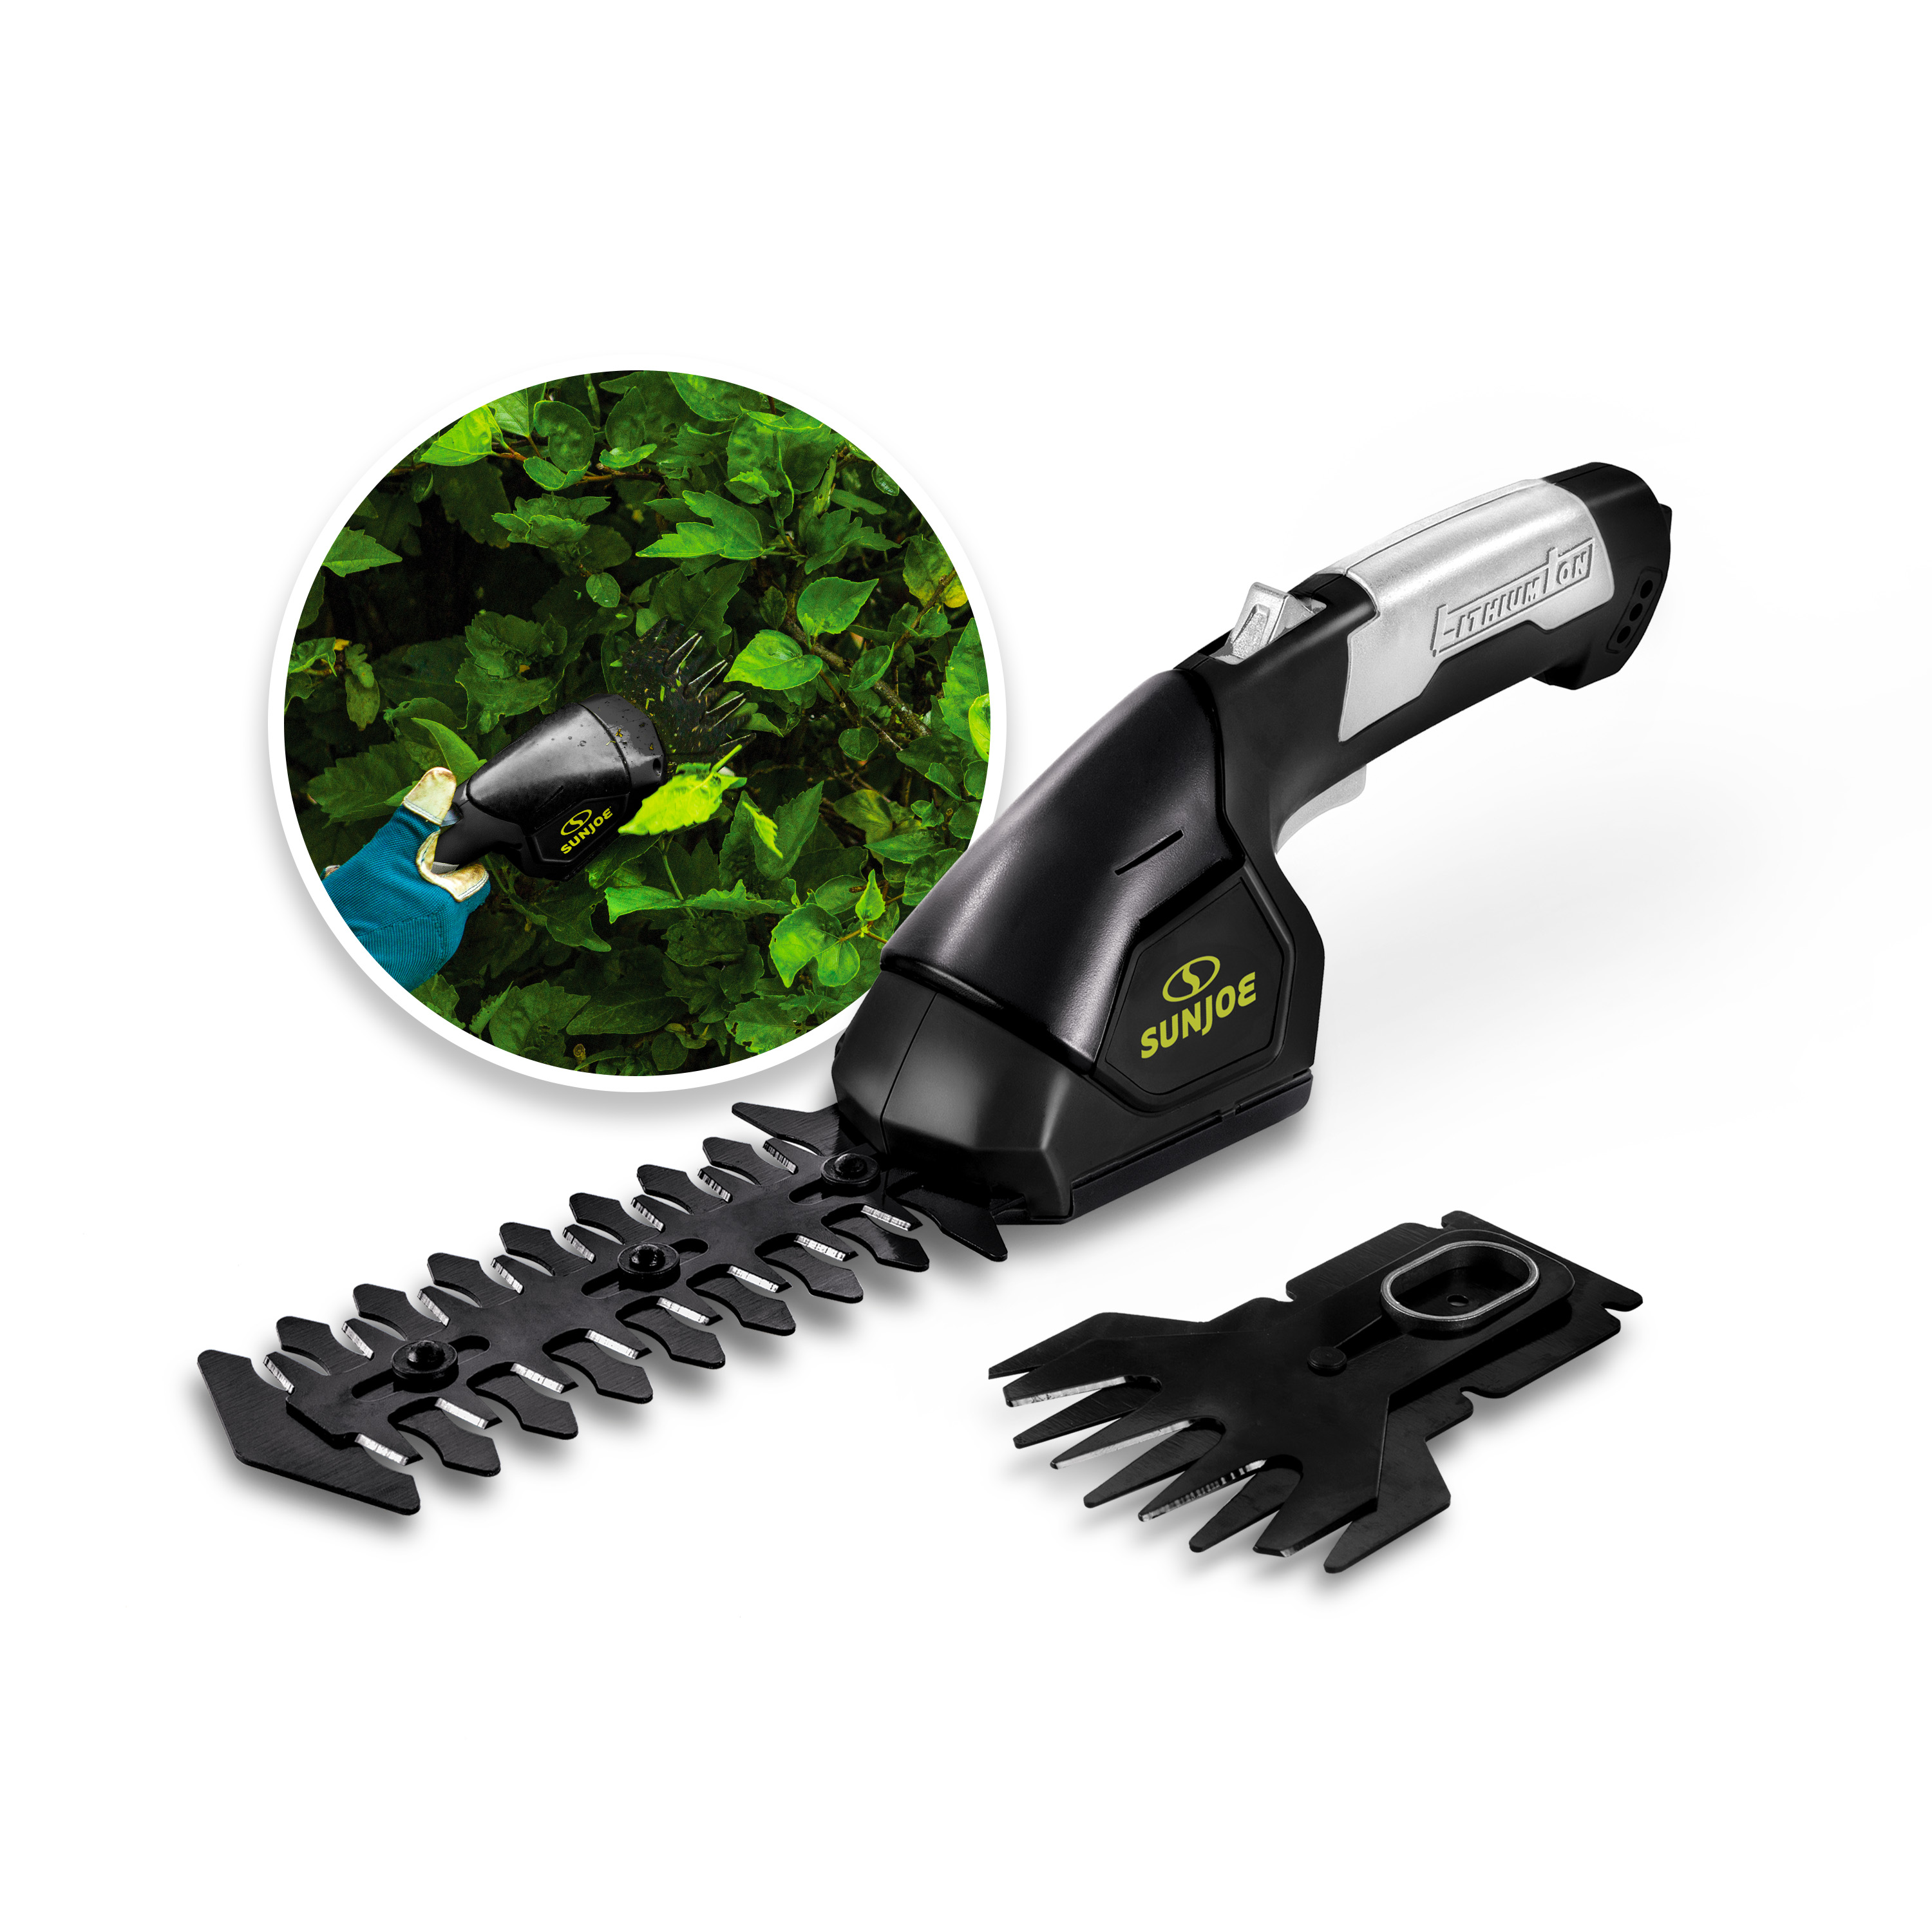 Image of Sun Joe HJ604C 2-in-1 Cordless Grass Shear + Hedger | 7.2-Volt | W/ 1.5-Ah Battery + Charger